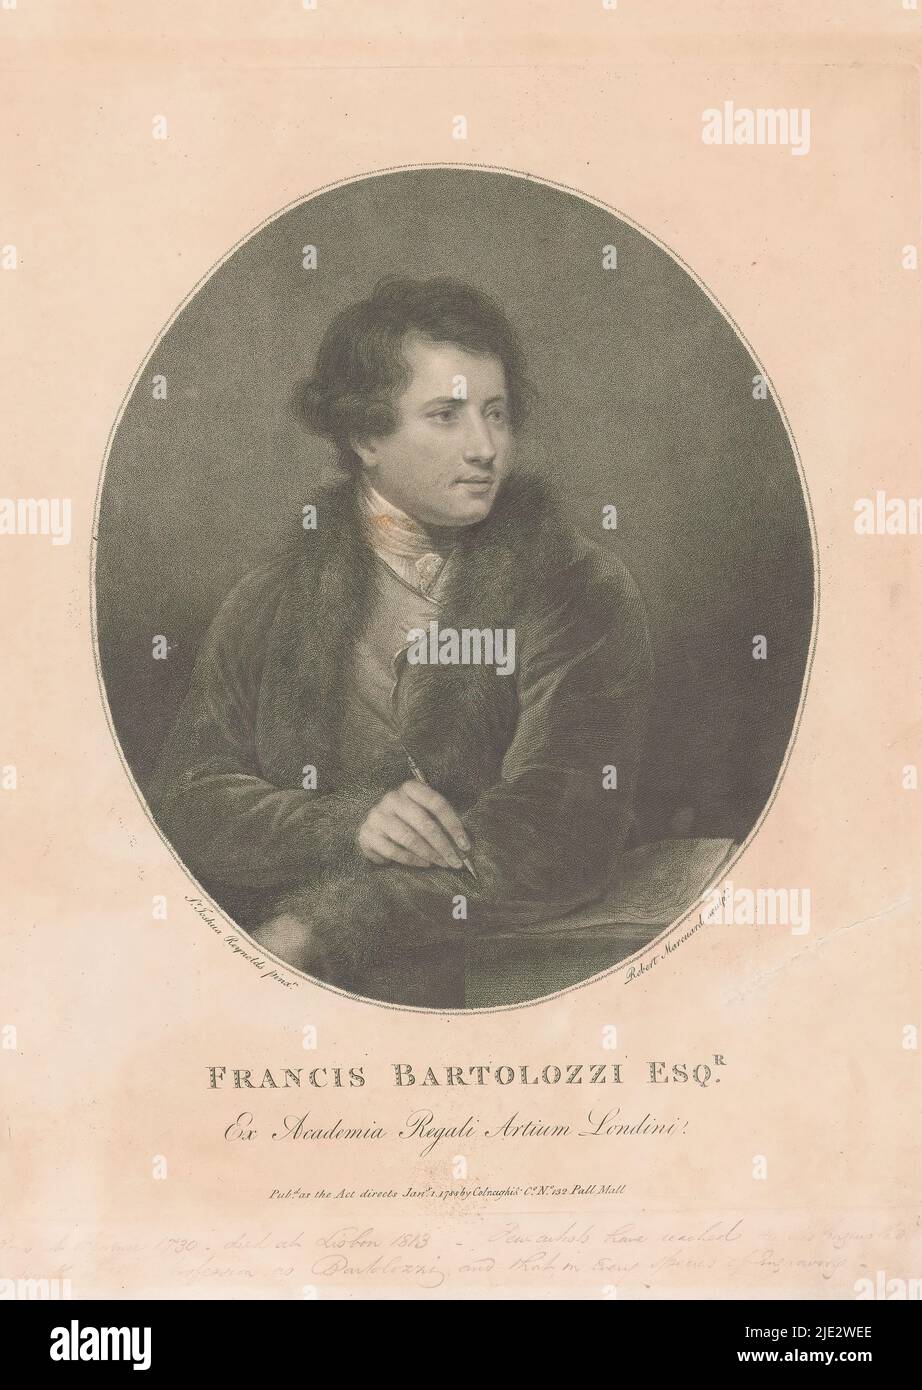 Portrait of printmaker Francesco Bartolozzi, Francis Bartolozzi Esqr. (title on object), Portrait of Francesco Bartolozzi in a coat with a fur collar holding an etching needle in his right hand. With his left elbow he leans on a table with a print on it., print maker: Robert Samuel Marcuard, (mentioned on object), after painting by: Joshua Reynolds, (mentioned on object), publisher: Colnaghi & Co, (mentioned on object), London, Jan-1788, paper, etching, height 321 mm × width 265 mm Stock Photo